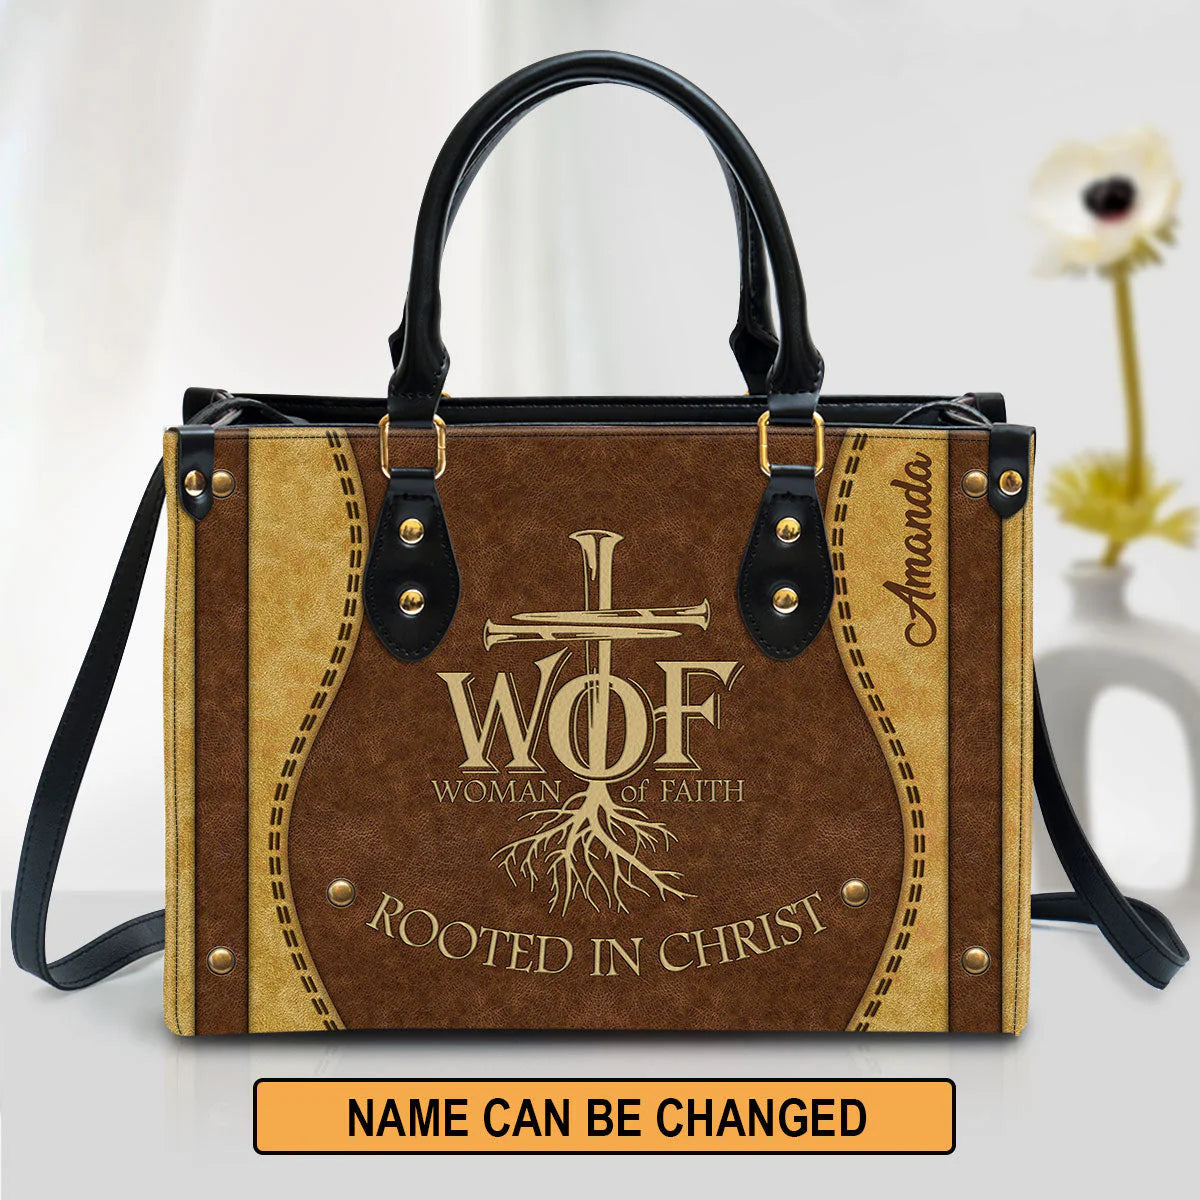 Christianartbag Handbags, Woman Of Faith Leather Bags, Personalized Bags, Gifts for Women, Christmas Gift, CABLTB01300723. - Christian Art Bag